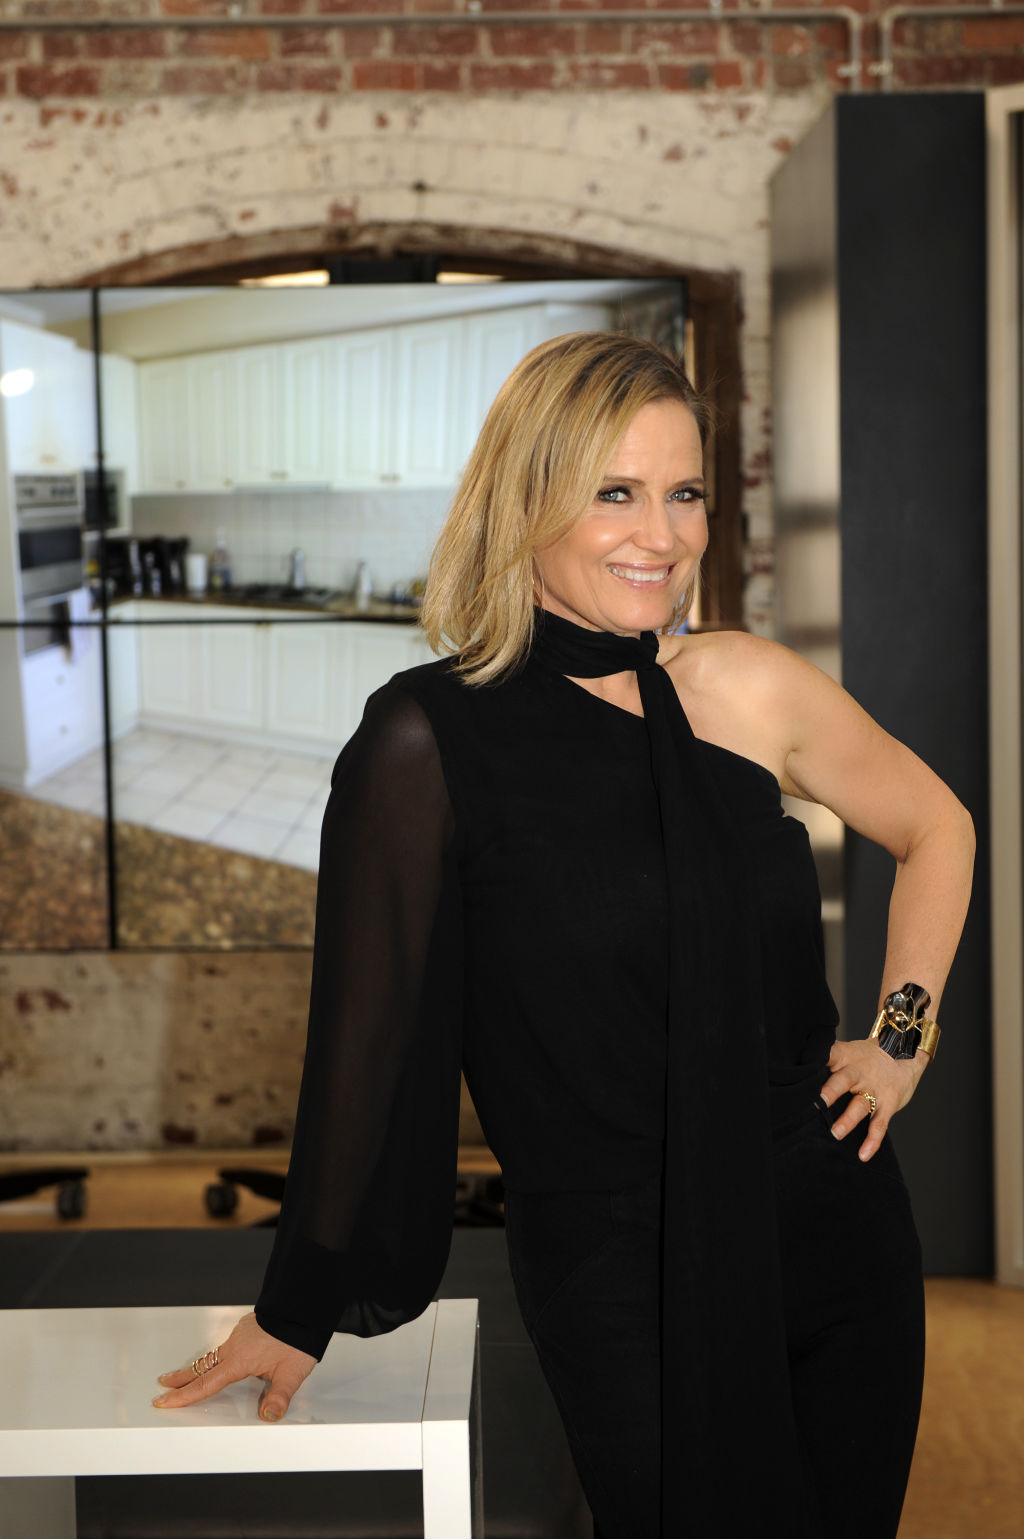 Shaynna Blaze's first home was a suburban cottage shrouded in rhododendrons and azaleas. Photo: Vanessa Hall/Foxtel